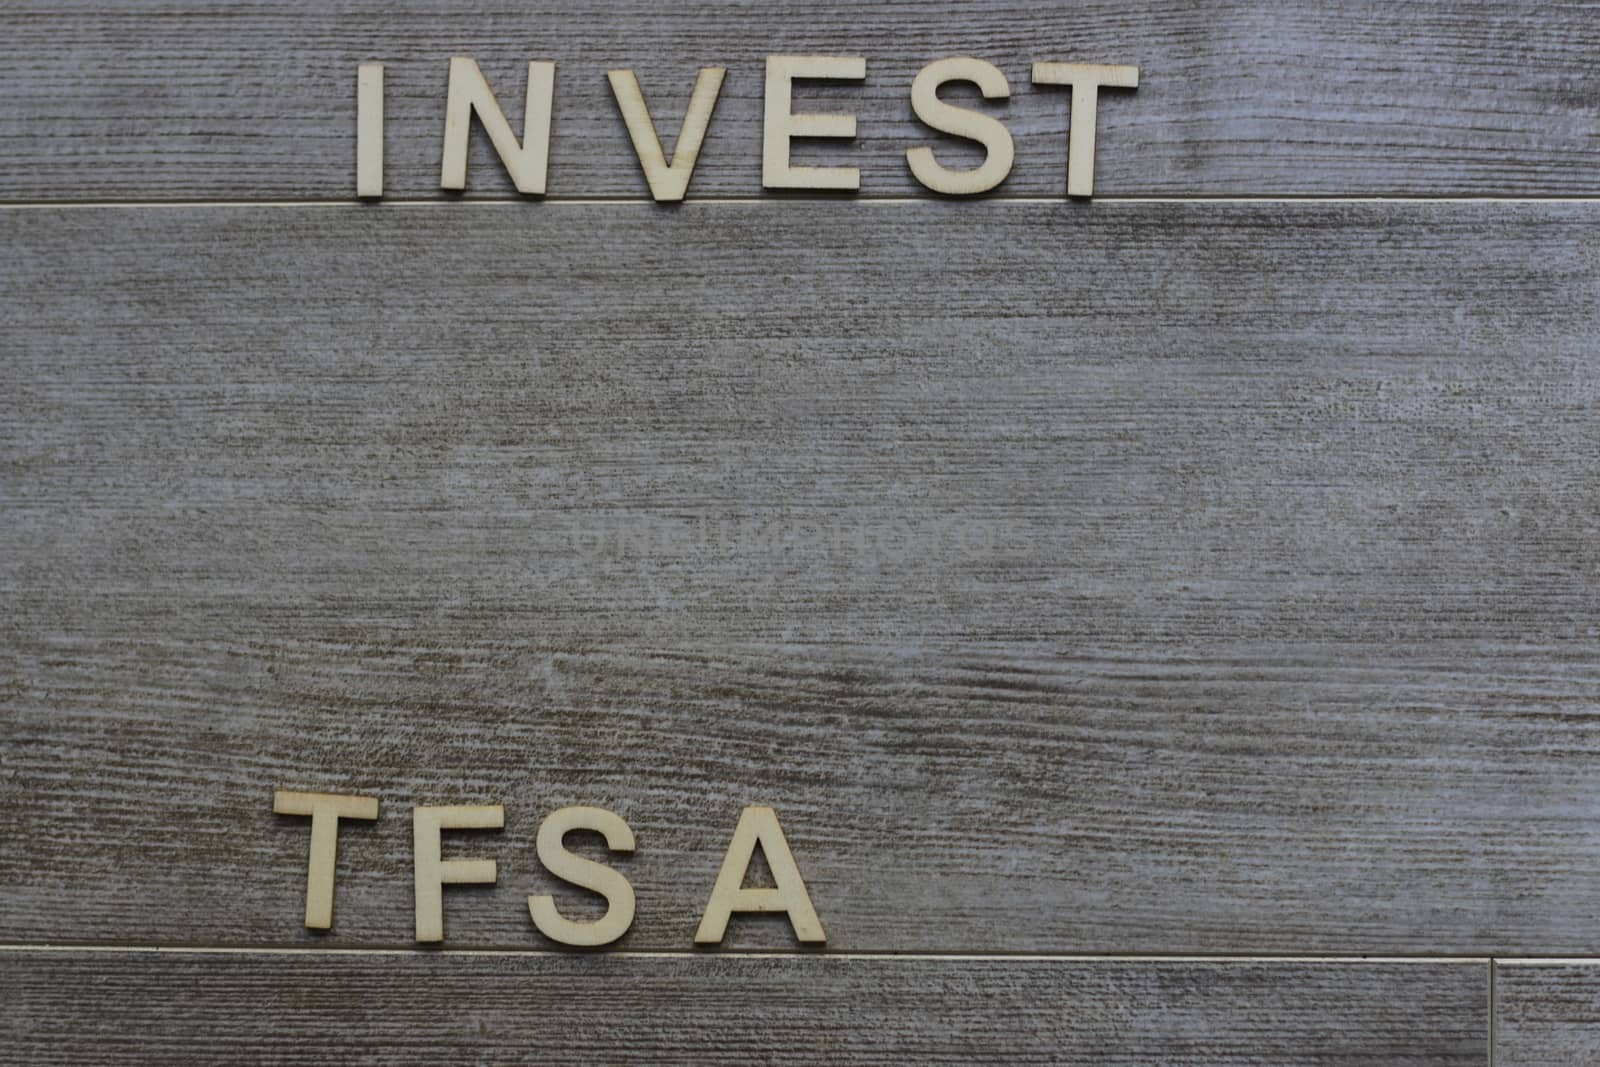 invest in a tfsa theme. the tfsa stands for tax free savings account in Canada. High quality photo